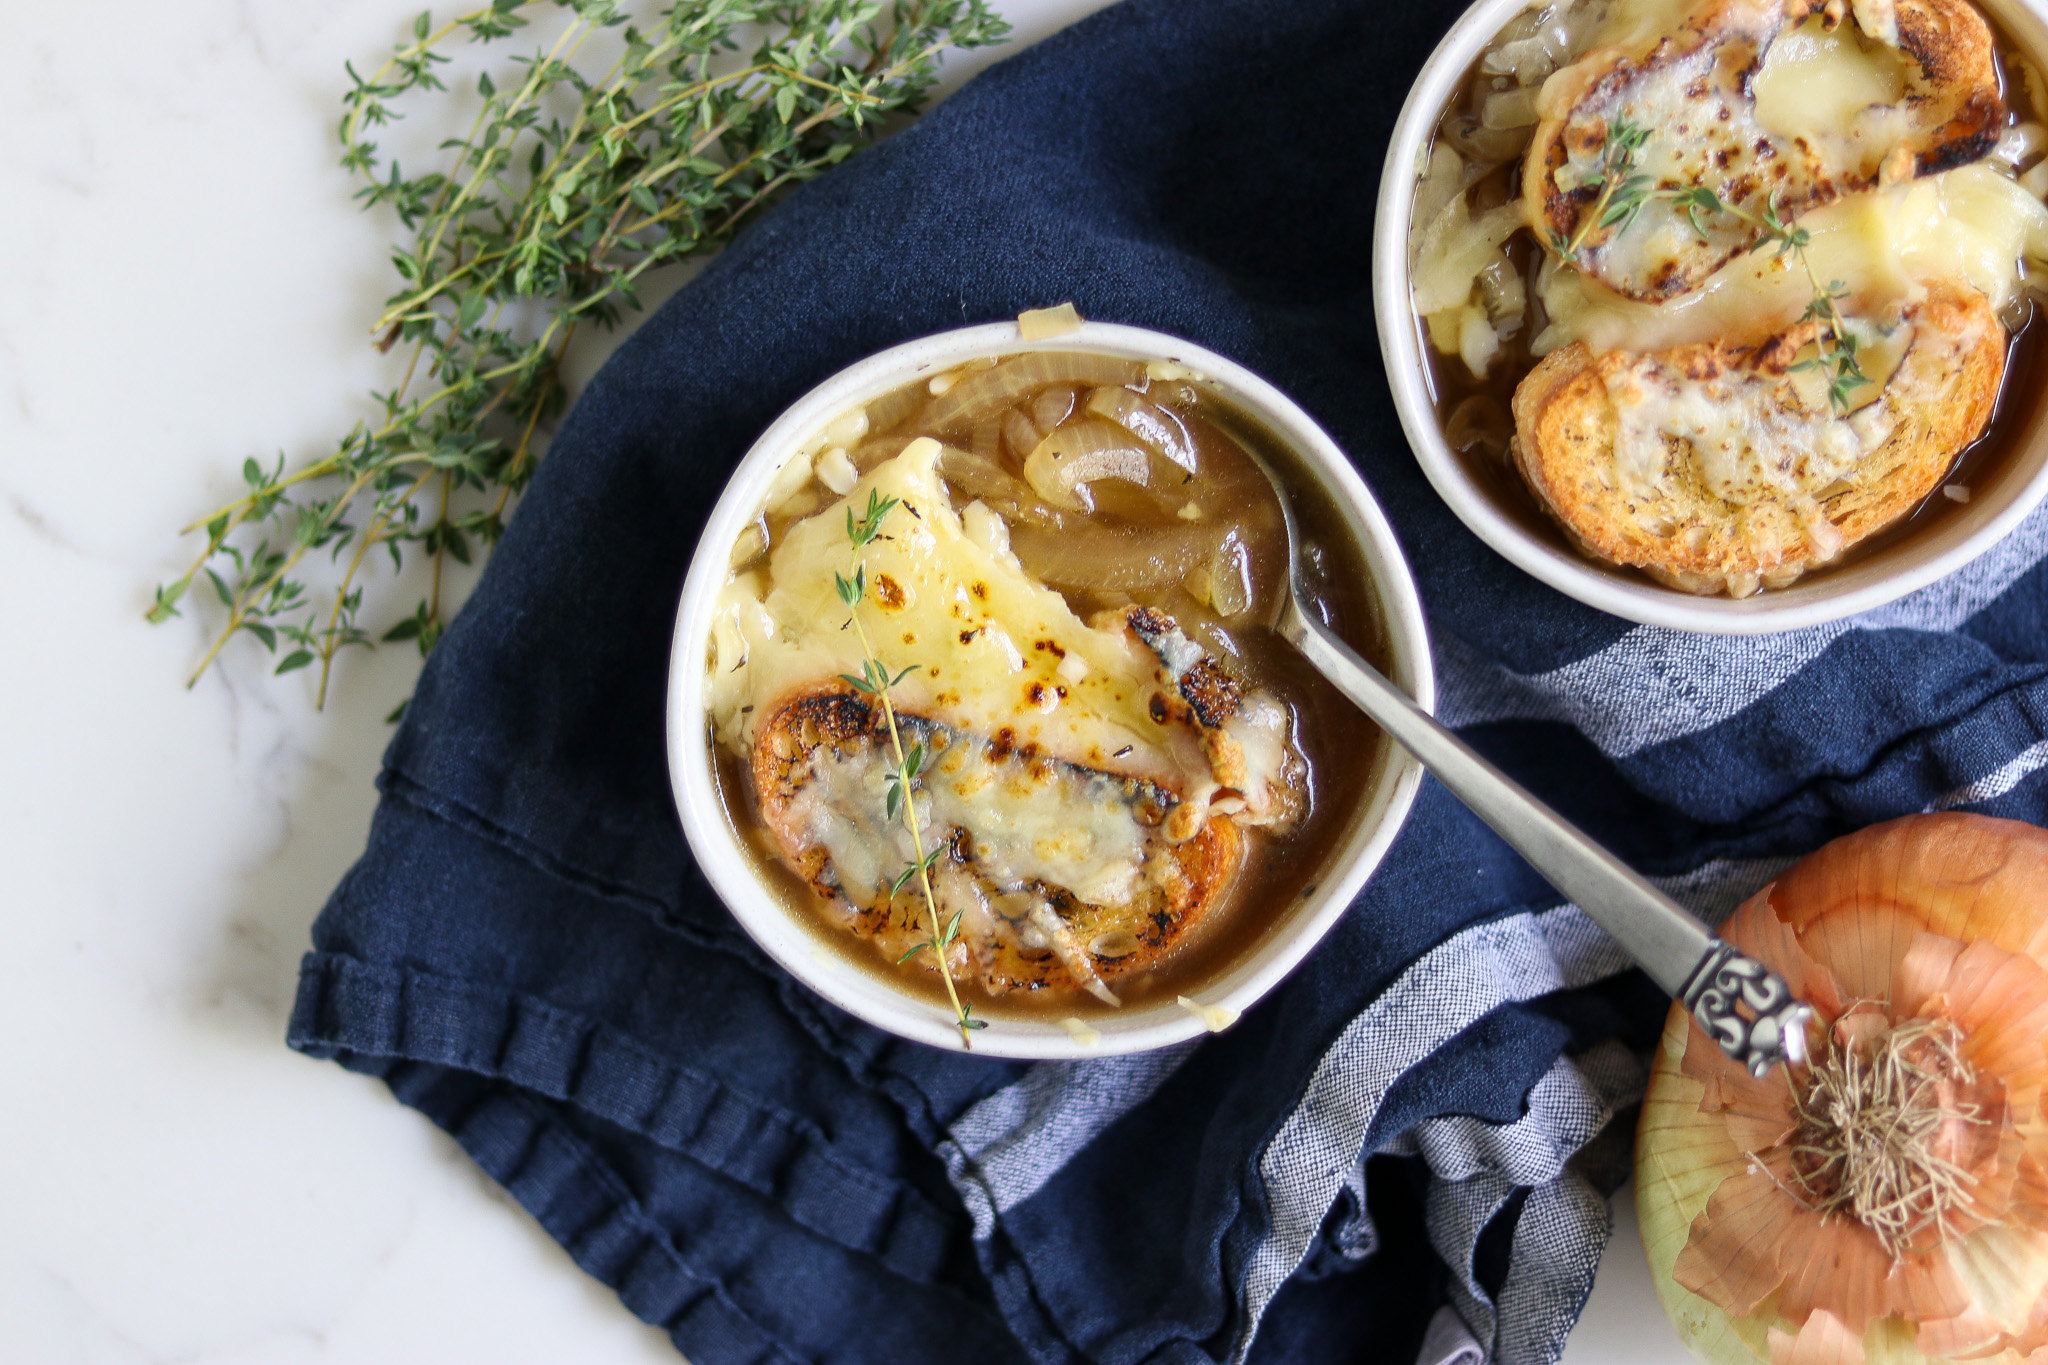 Serving Home Canned French Onion Soup